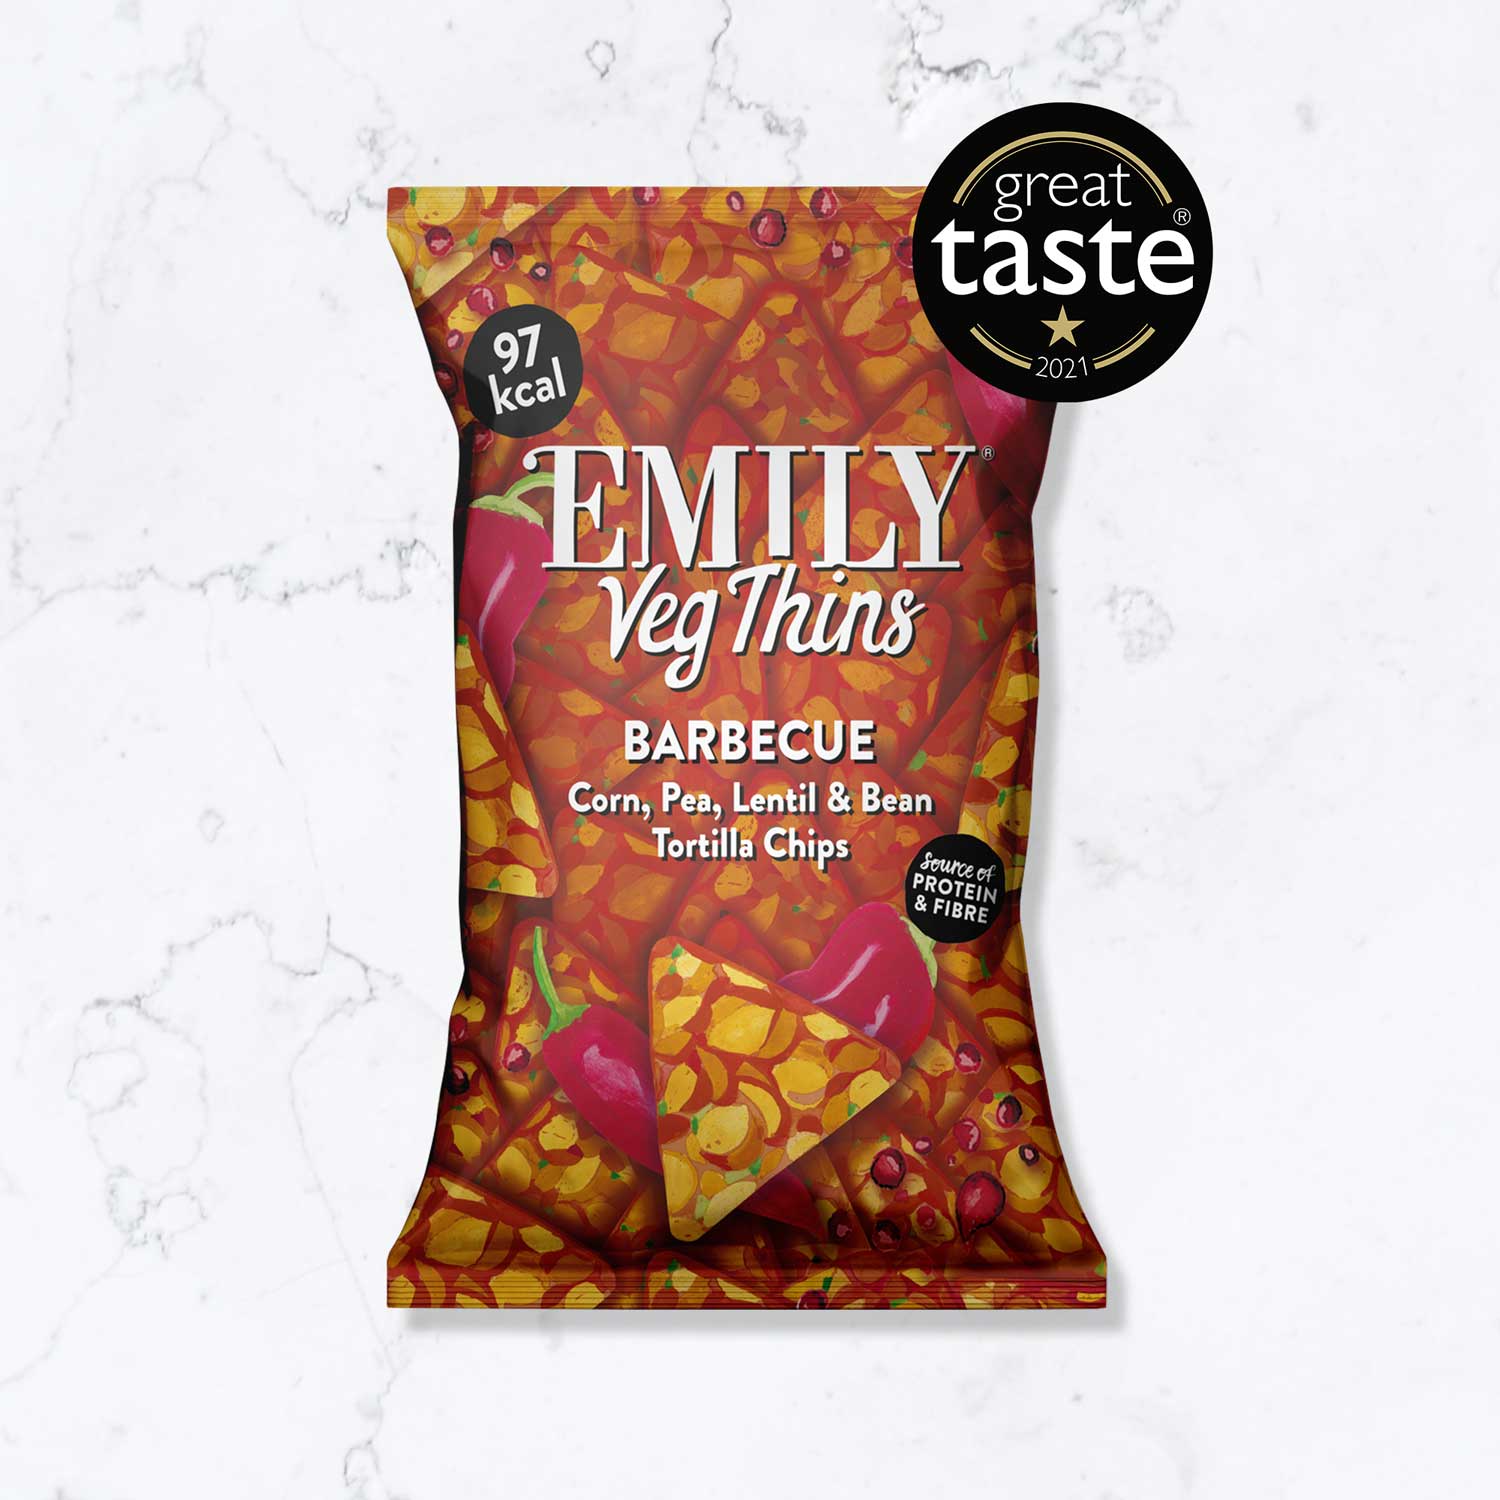 EMILY Veg Thins Barbecue